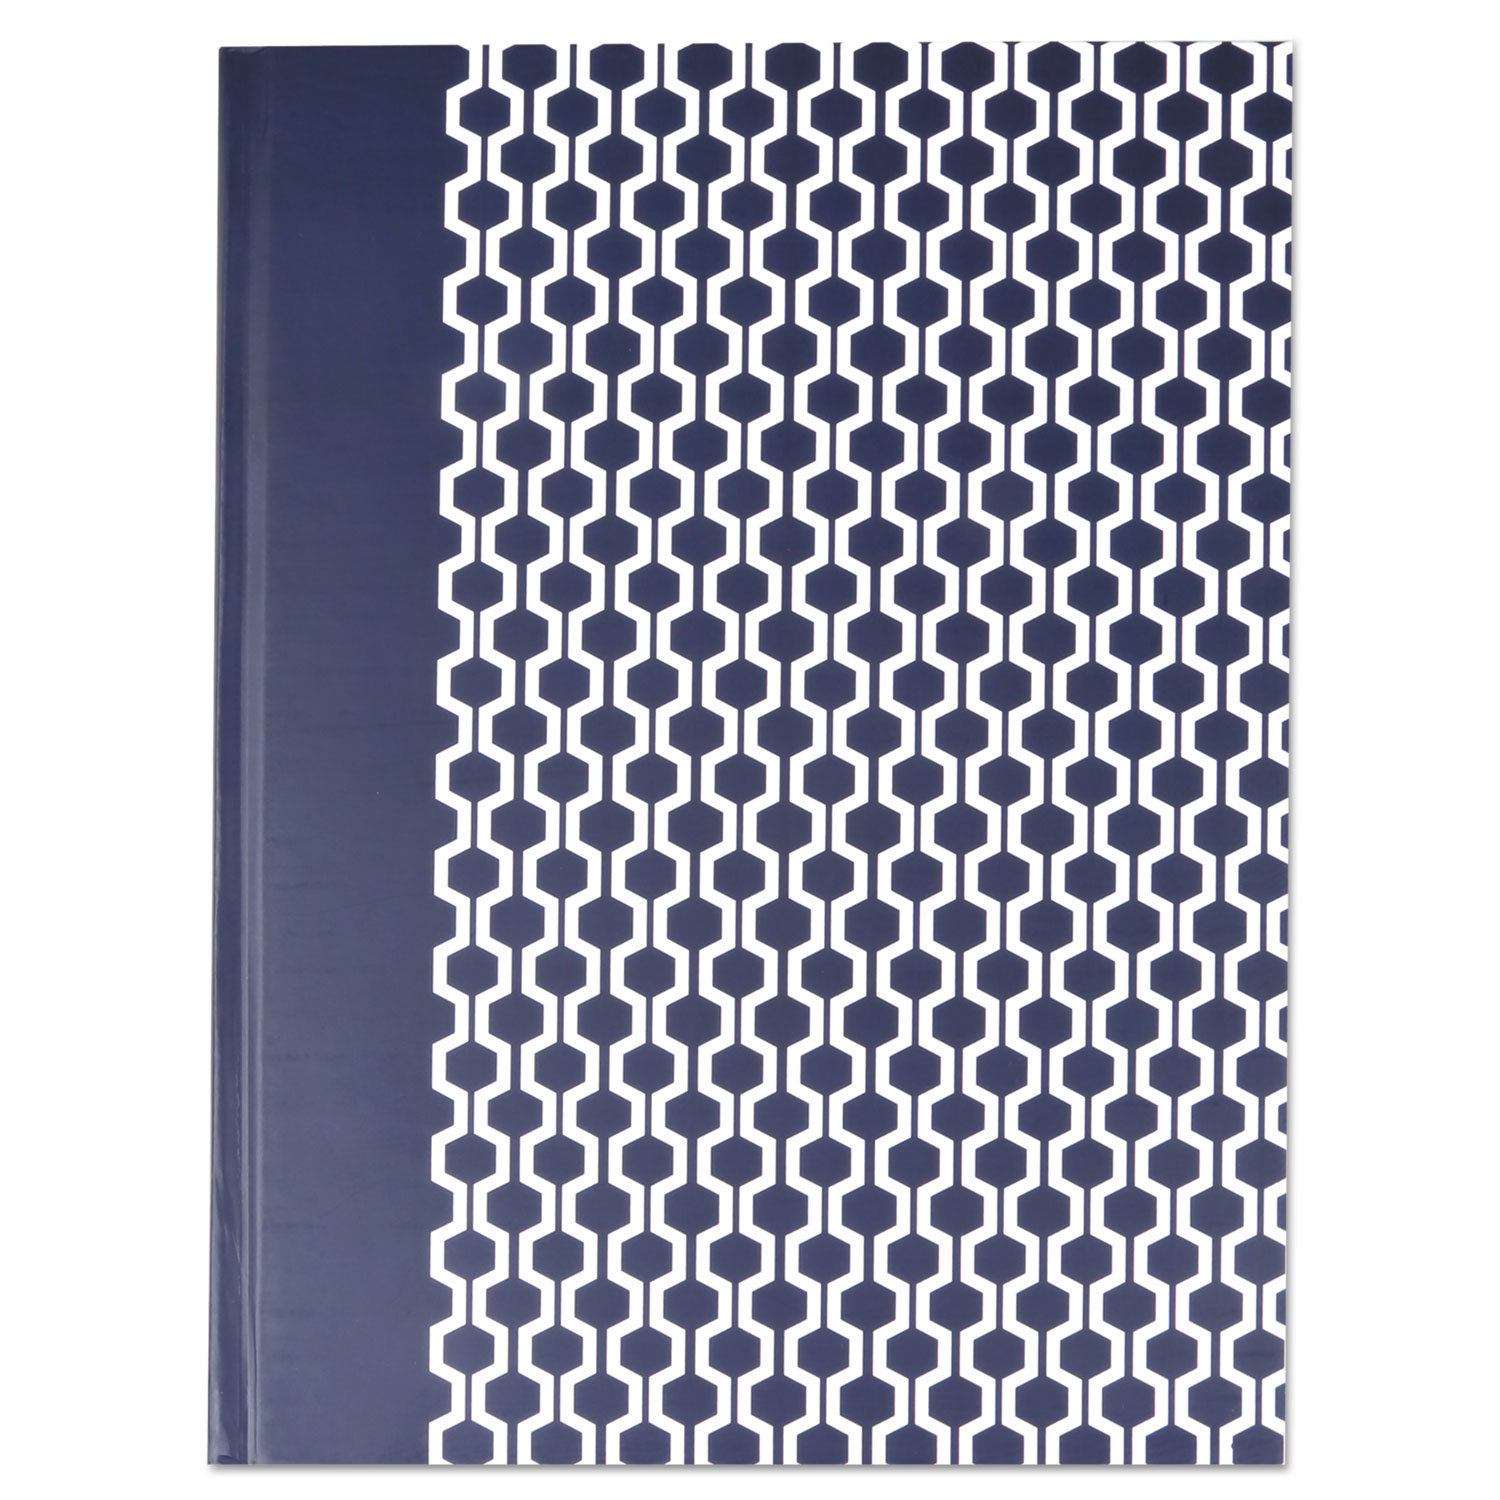  Universal UNV66351 Casebound Hardcover Notebook, Wide/Legal Rule, Blue/Hex Pattern, 10.25 x 7.68, 150 Sheets (UNV66351) 